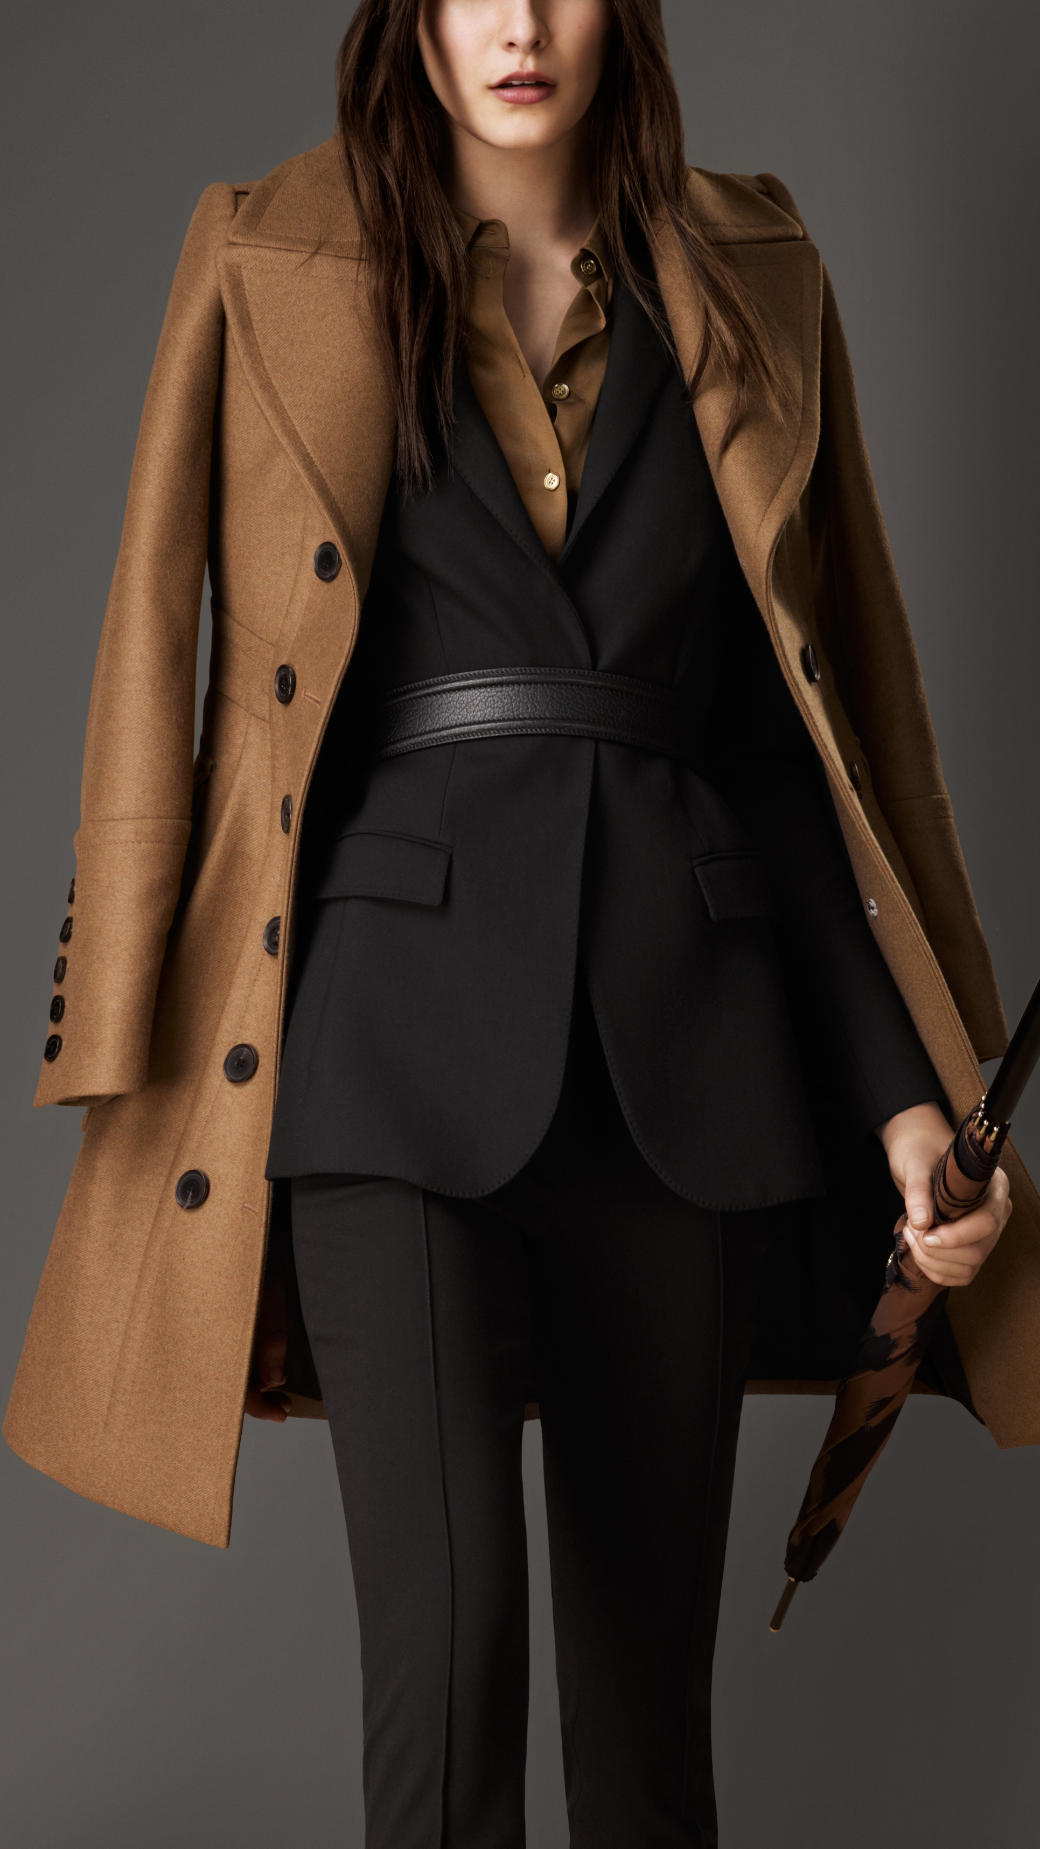 Lyst - Burberry Bonded Wool Cashmere Military Coat in Brown